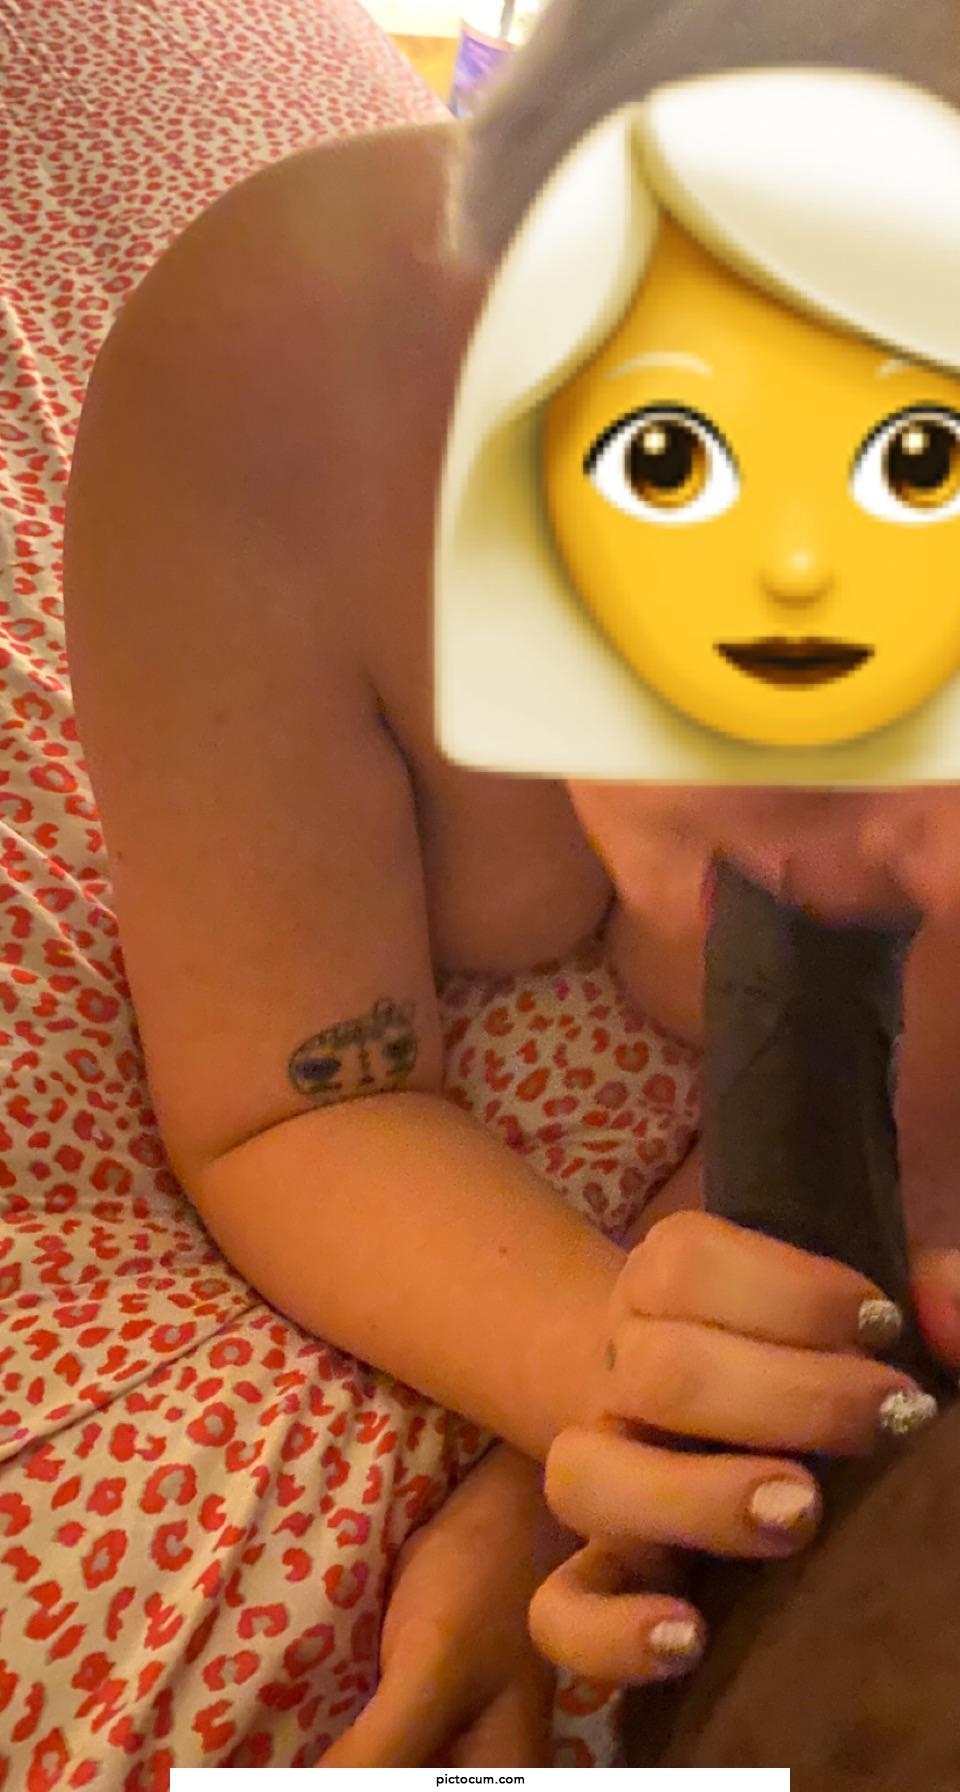 A sexy Hotwife at work 😈